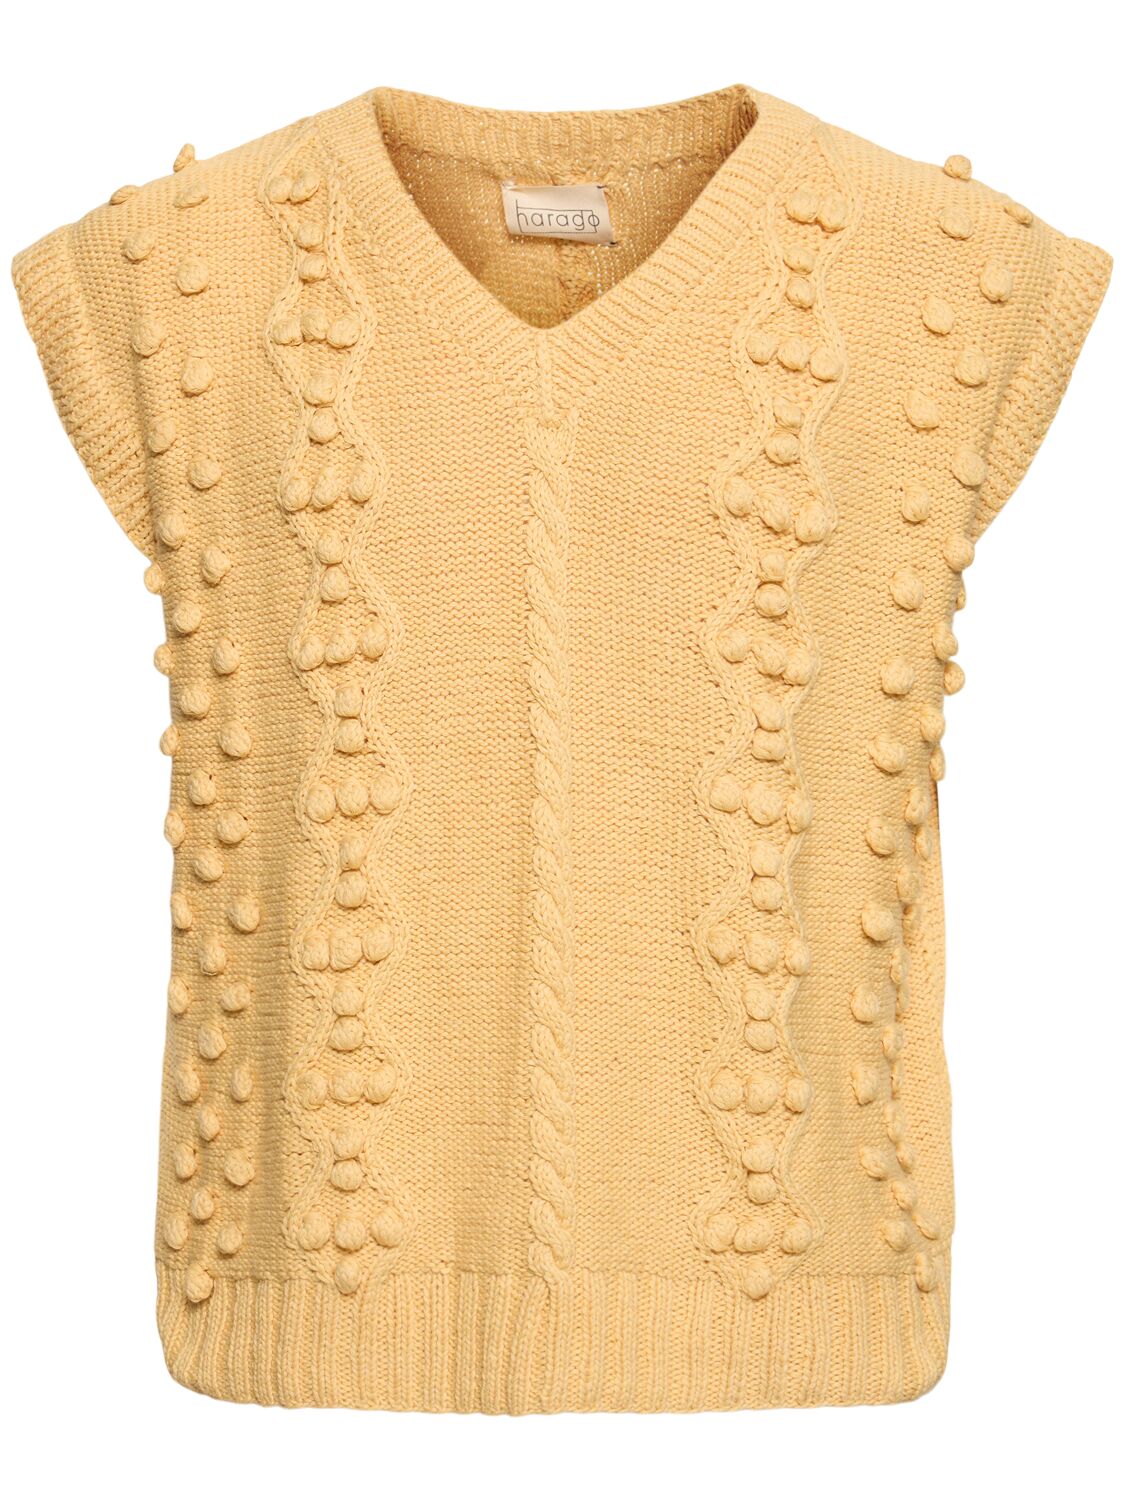 Harago Men's Craft Heritage Cable-knit Cotton Sweater Vest In Beige